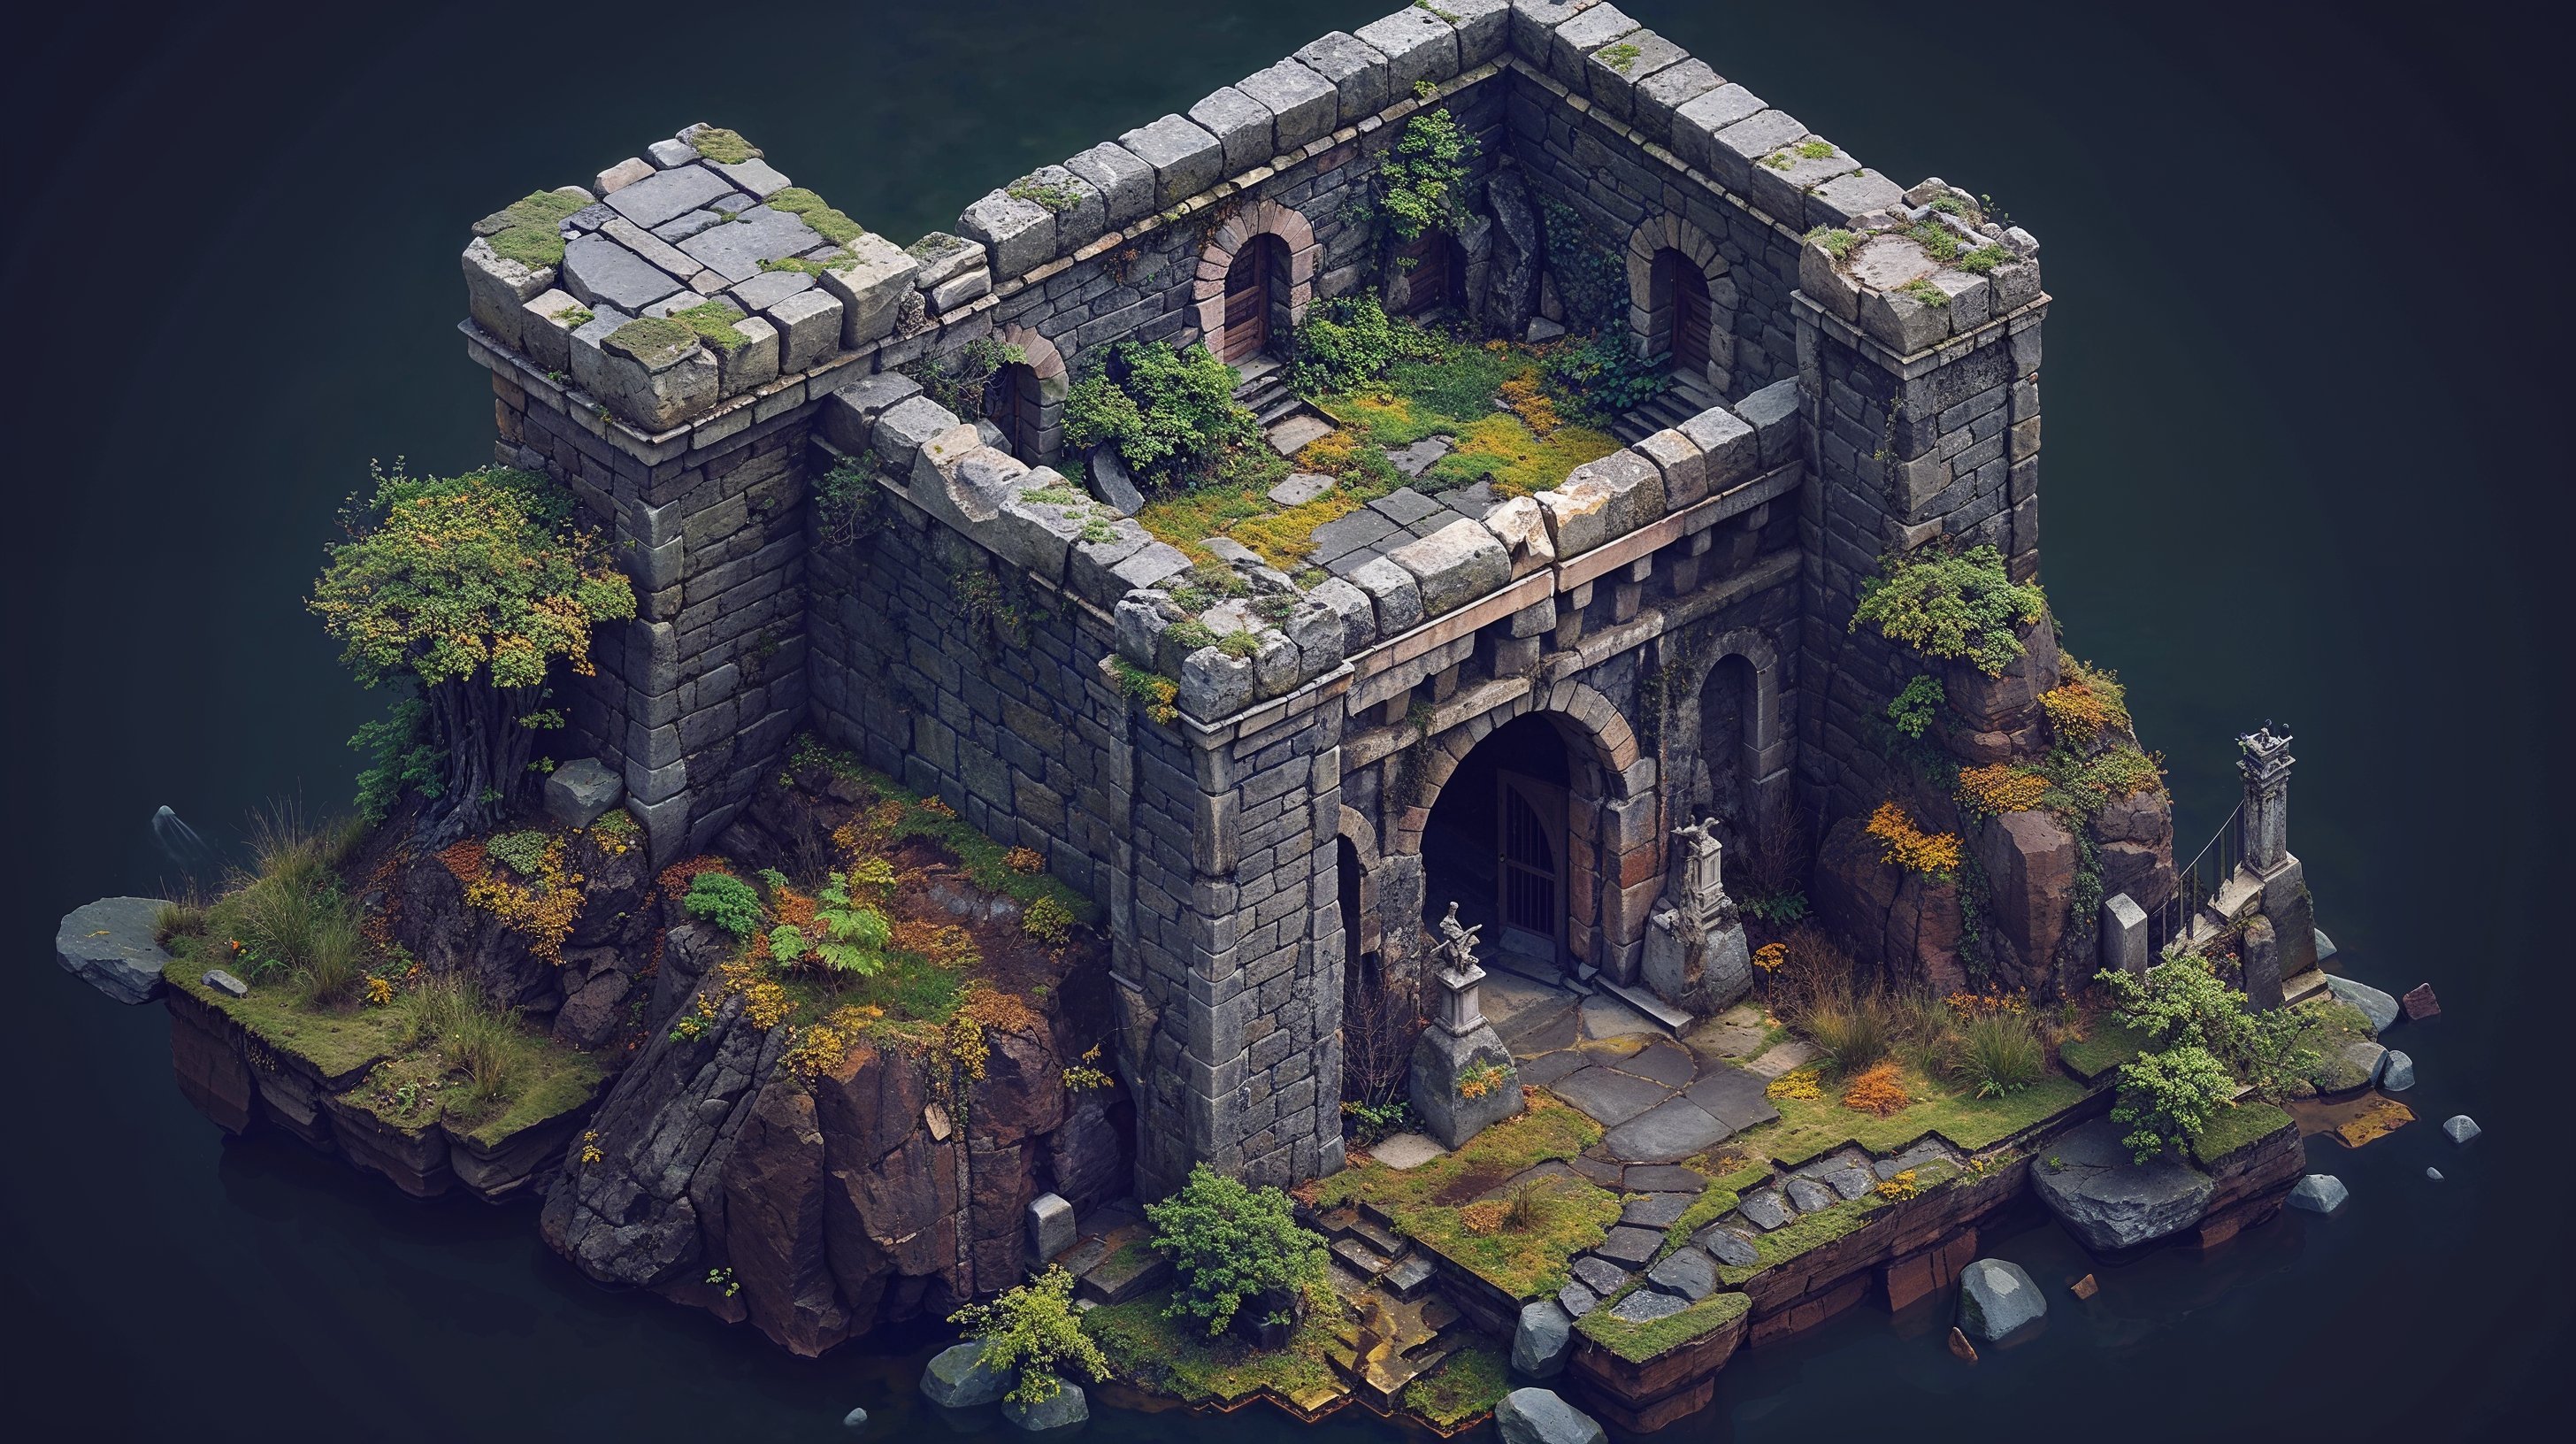 HD isometric wallpaper of an abandoned medieval fortress on a secluded island, featuring overgrown flora and aged stone architecture.